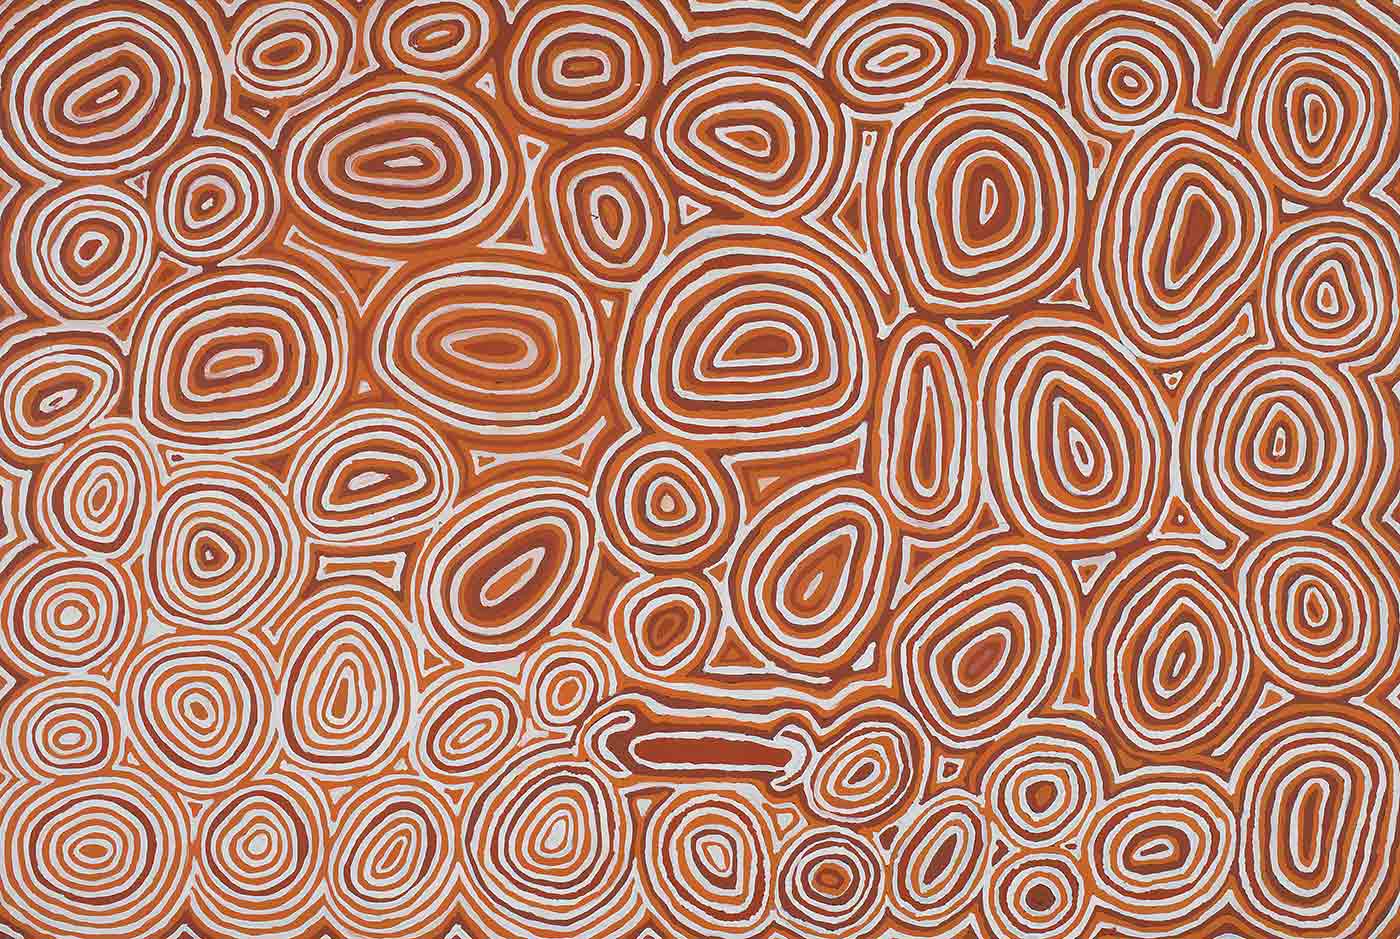 A painting on brown linen covered in concentric ovals and circles in white, light brown and dark brown with spaces between filled in the same colours. In the centre is a concentric circle with a flat bottom edge, and towards the bottom centre edge is a brown horizontal line with a C shape wrapped around each end. In the lower left corner the circles have wider white rings giving the appearance of a lighter area of ground. - click to view larger image